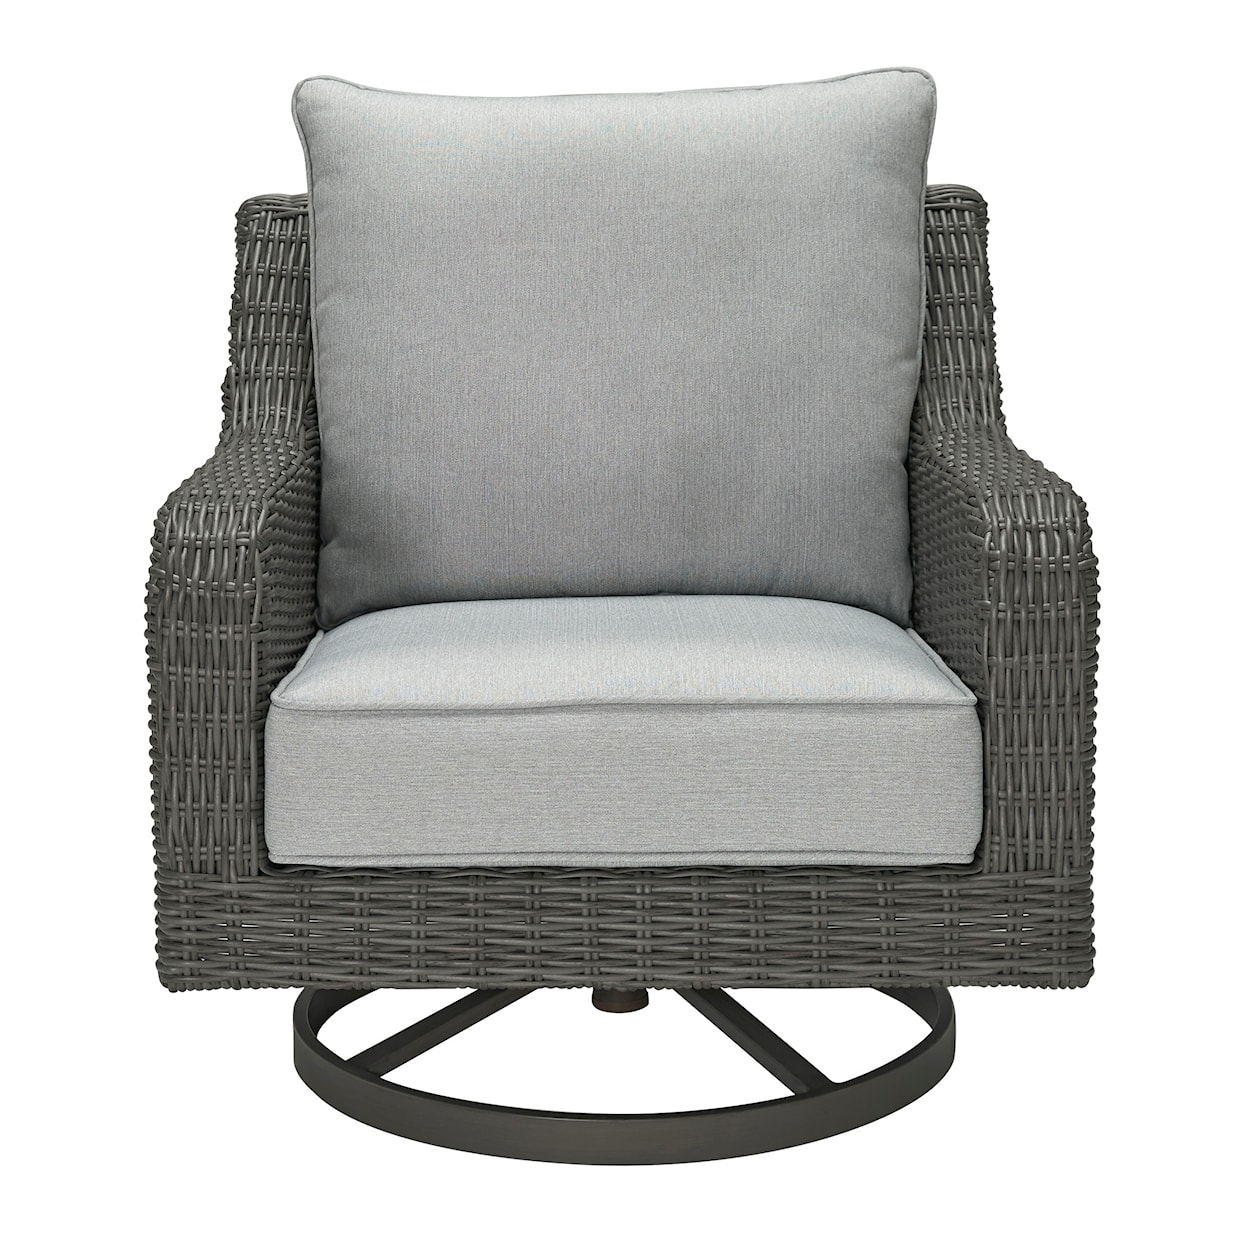 Michael Alan Select Elite Park Outdoor Swivel Lounge Chair with Cushion